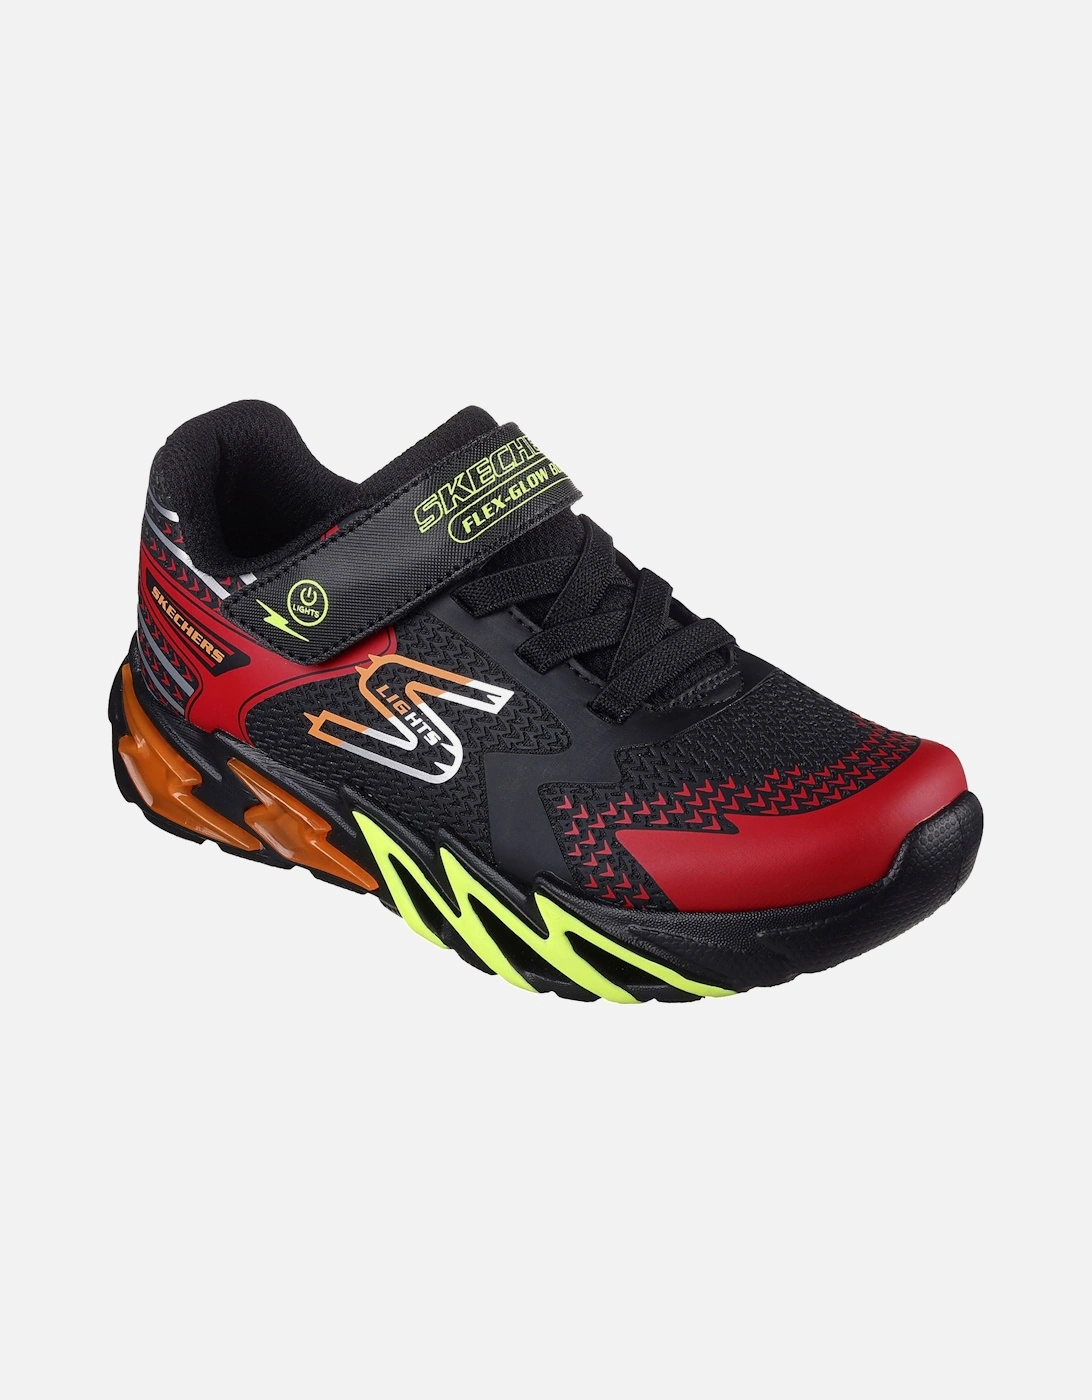 Kids S-Lights Glow Bolt Flashing Light Up Trainers - Black/Red